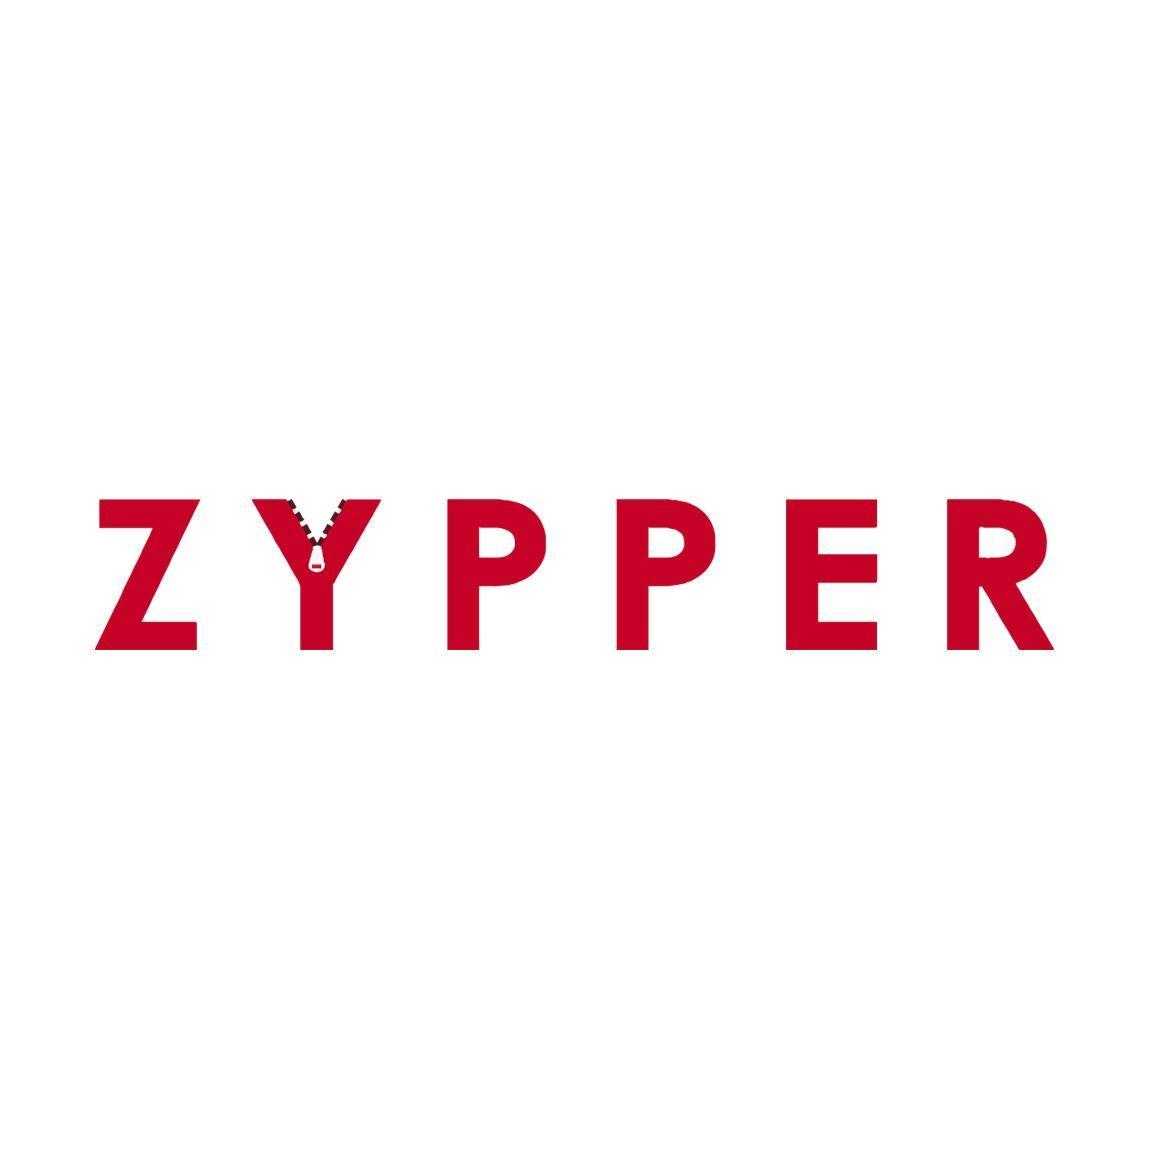 Zypper is an online evaluating tool that streamlines the RFI process by transferring information between IT anaylsts, customers, and vendors in real time.